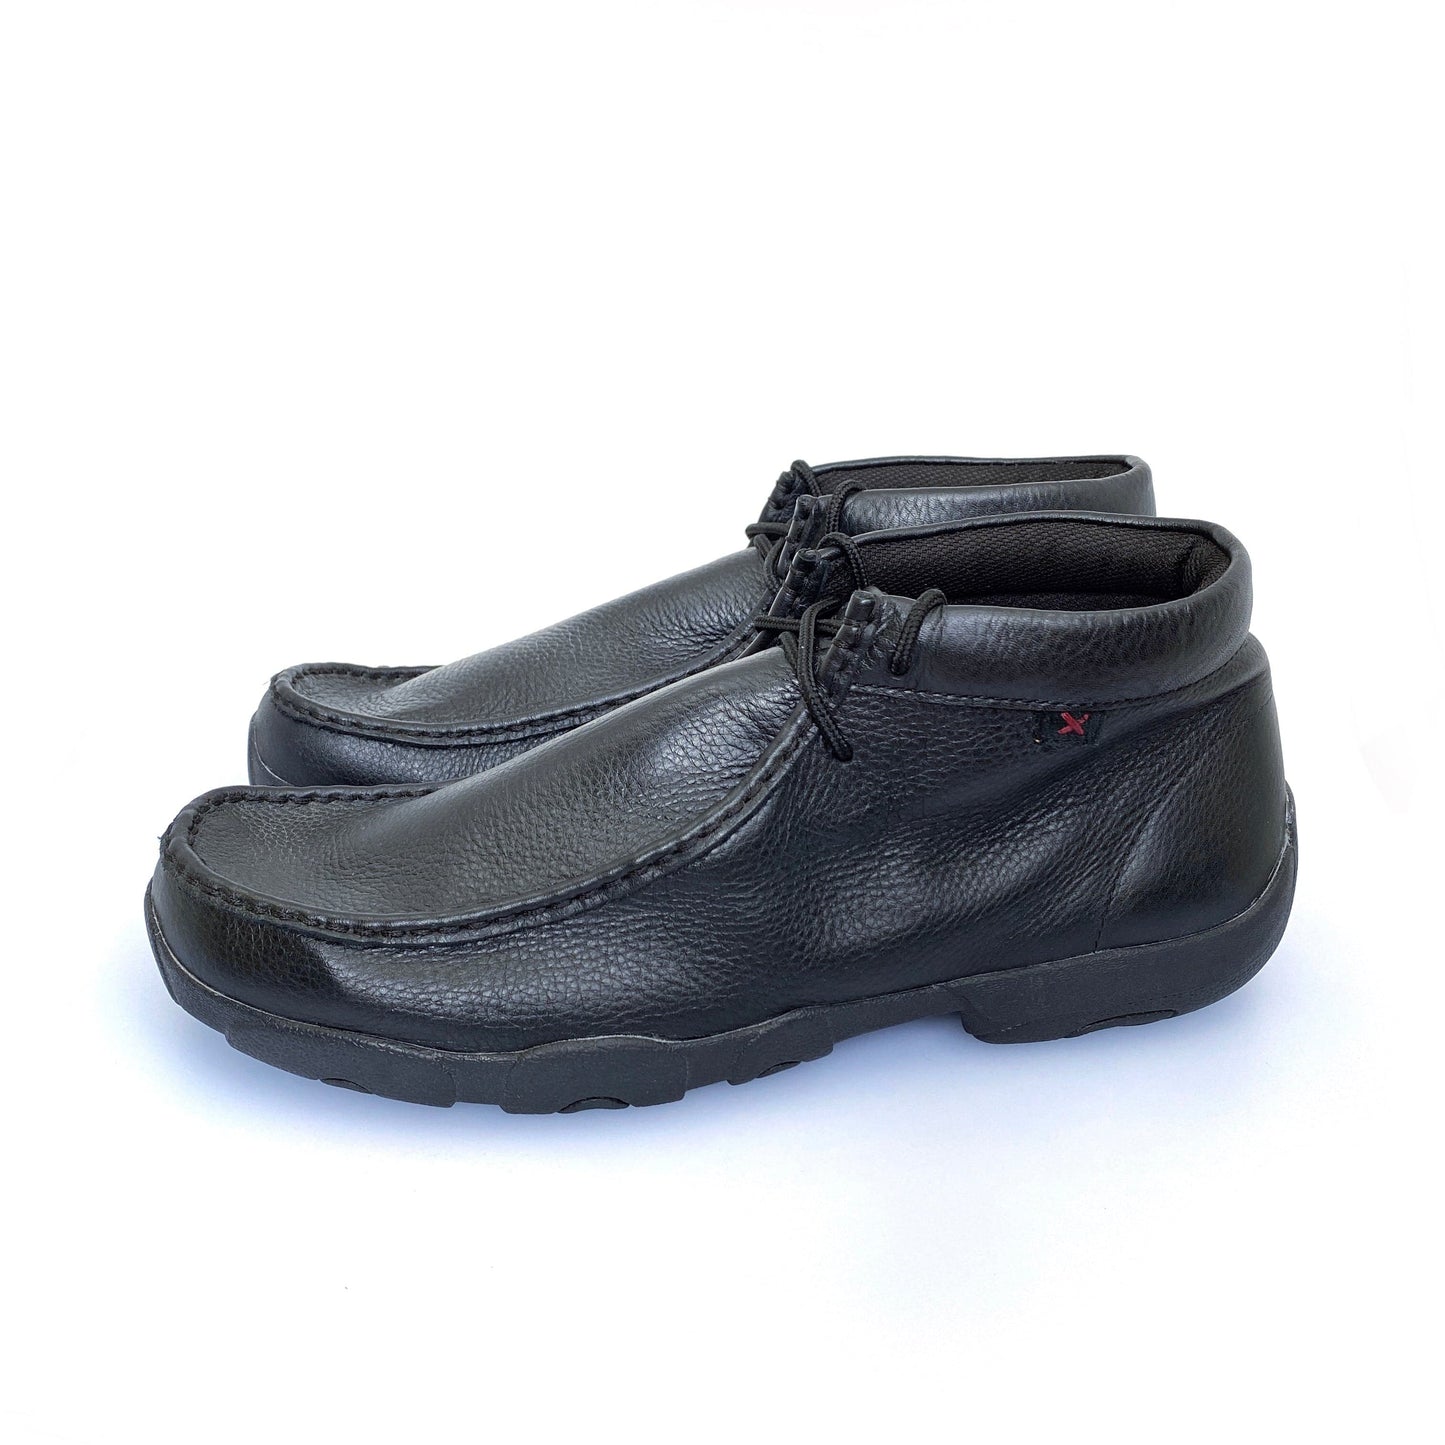 Twisted X MDM0016 Mens Driving Moc Size 13M, Black Leather - Pre-Owned